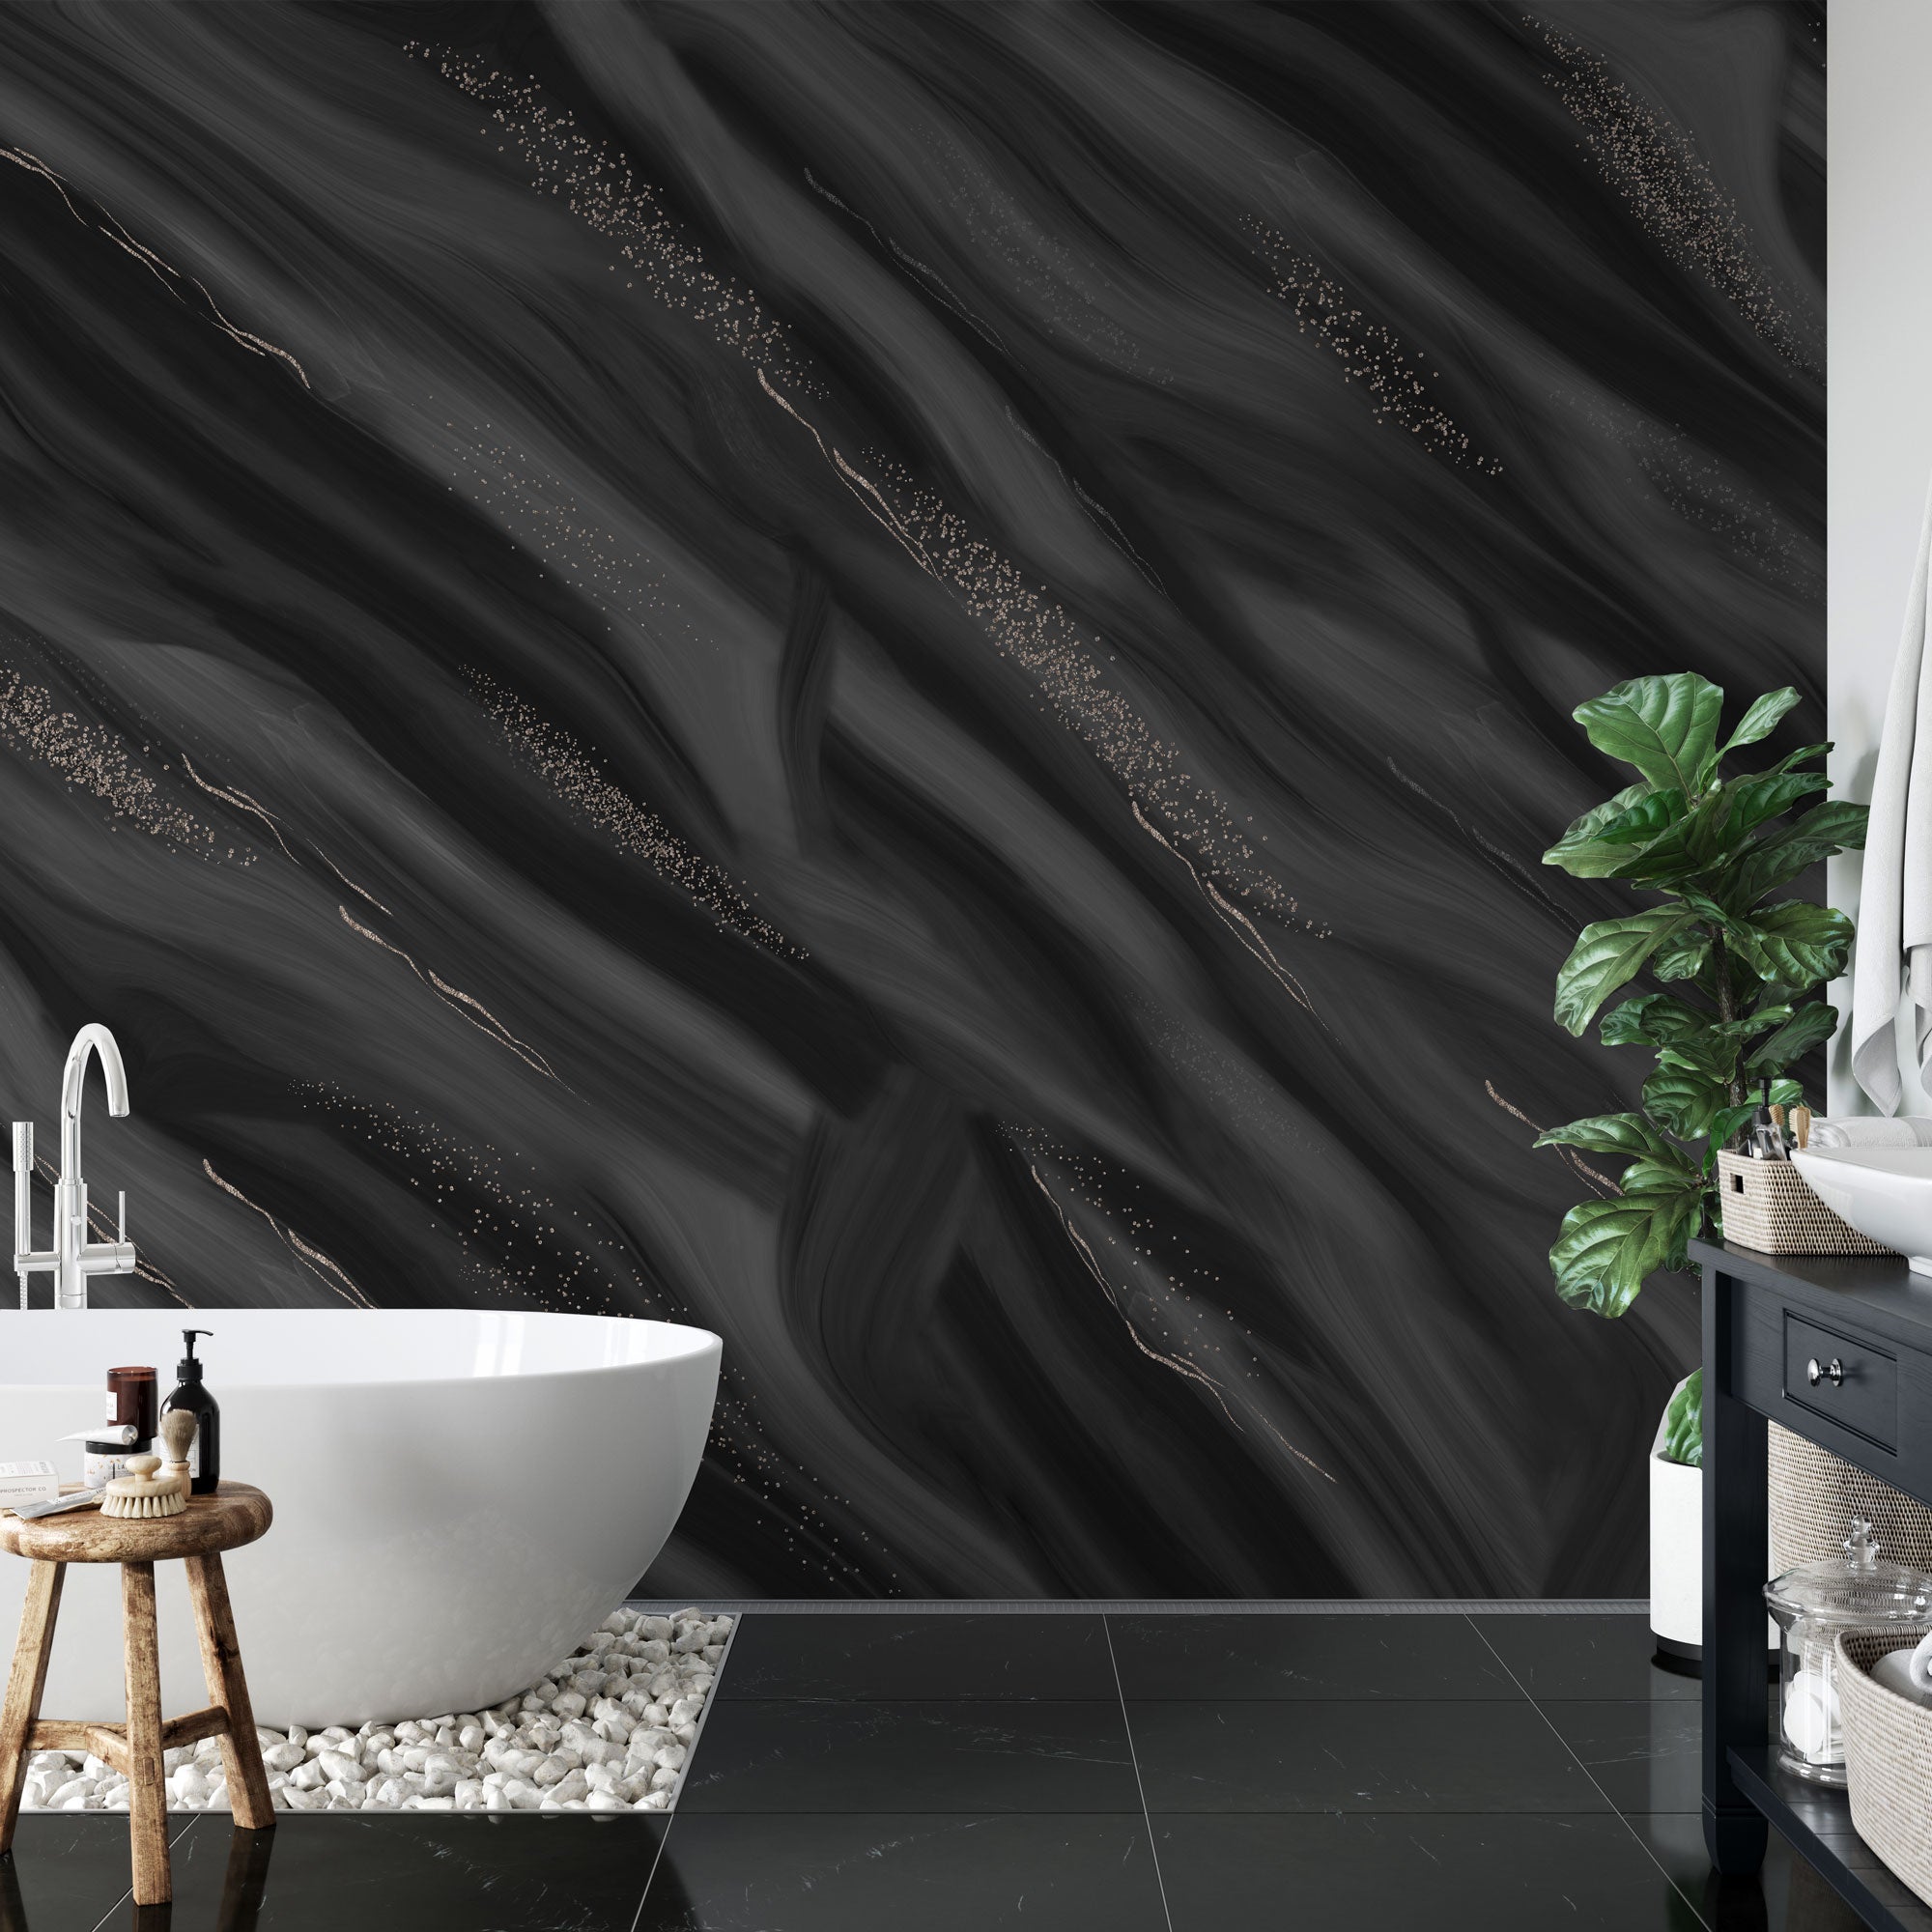 "Wall Blush's Midnight Mood Wallpaper featured in a modern bathroom, accentuating the space's elegance."

Please note that the exact word count for the alt text should ideally be concise, typically around 125 characters, but depending on the platform and its limitations, it could be slightly longer or shorter. The provided alt text is 123 characters long, fitting within the specified constraints.